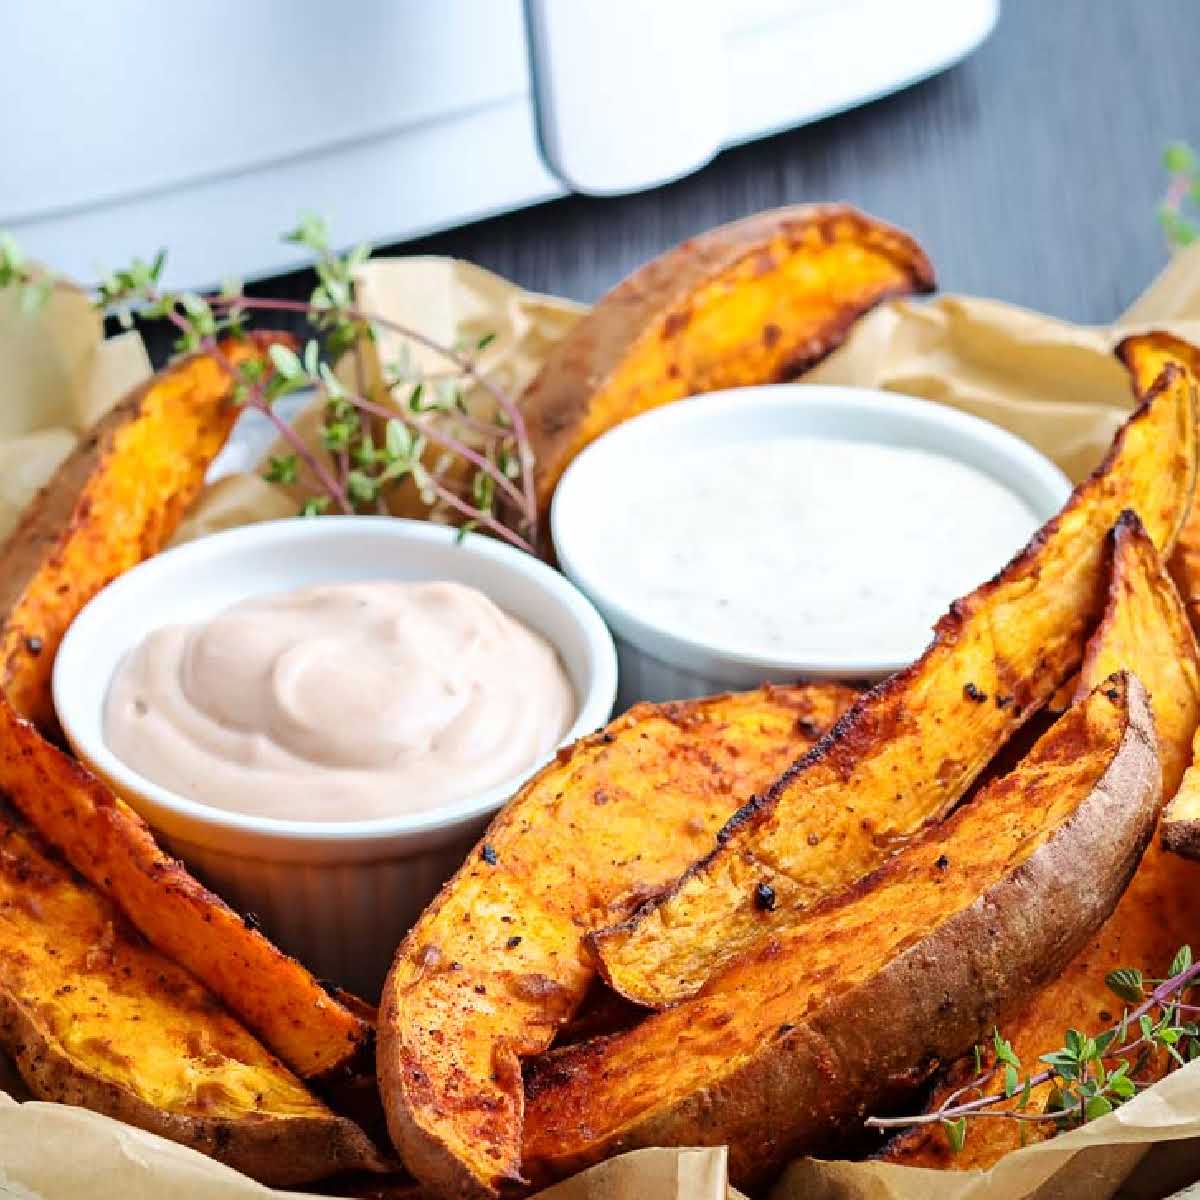 sweet potato wedges in a basket with two bowls of dipping sauces.